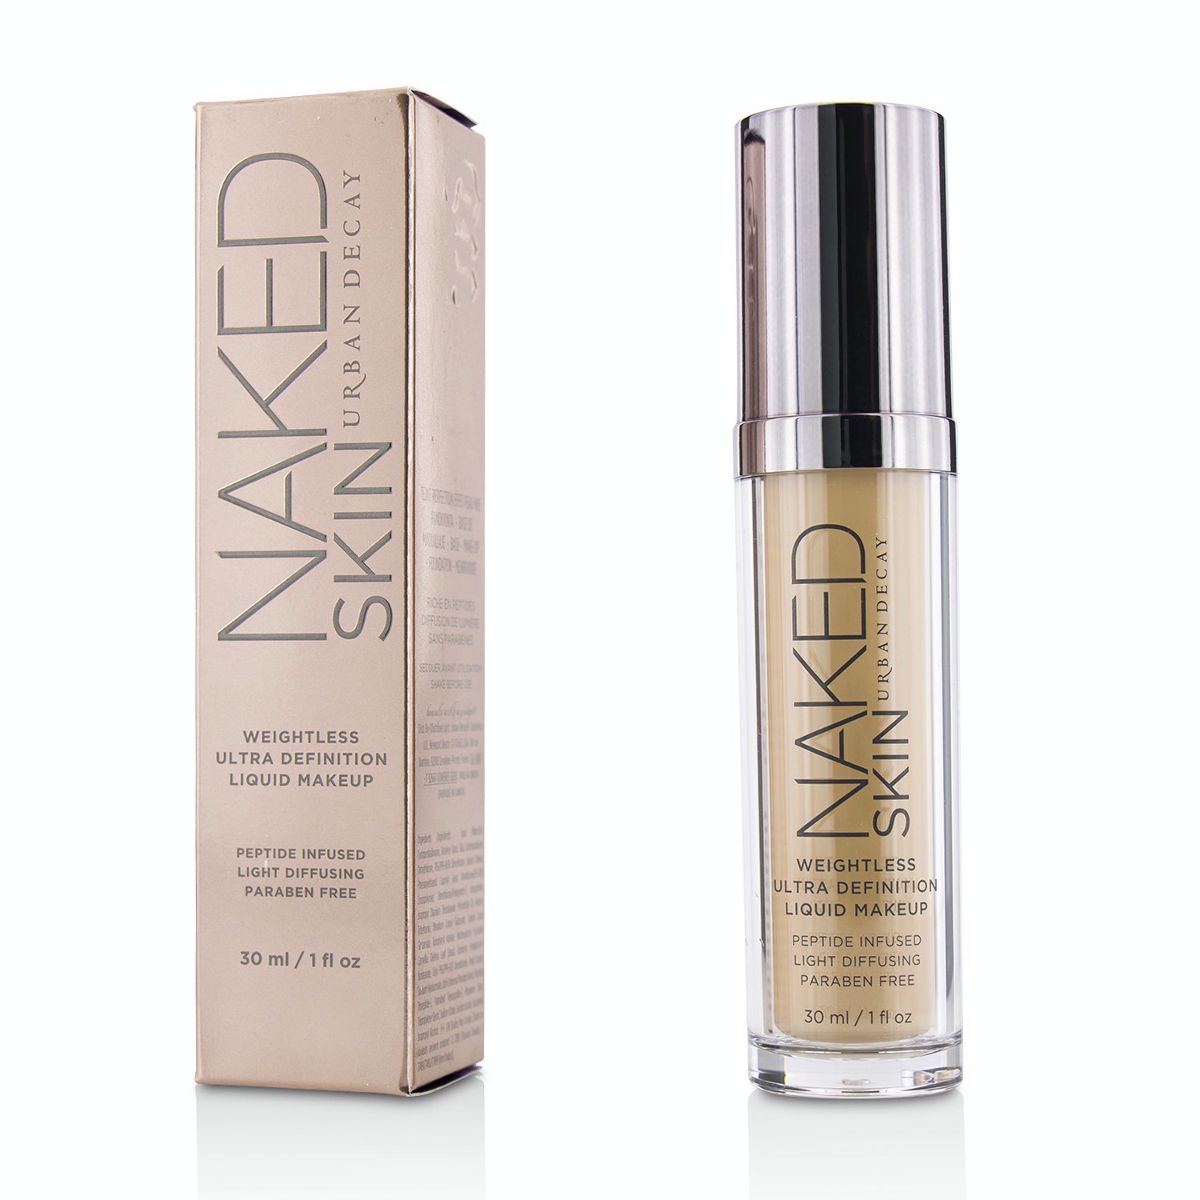 Naked Skin Weightless Ultra Definition Liquid Makeup - #1.0 Urban Decay Image